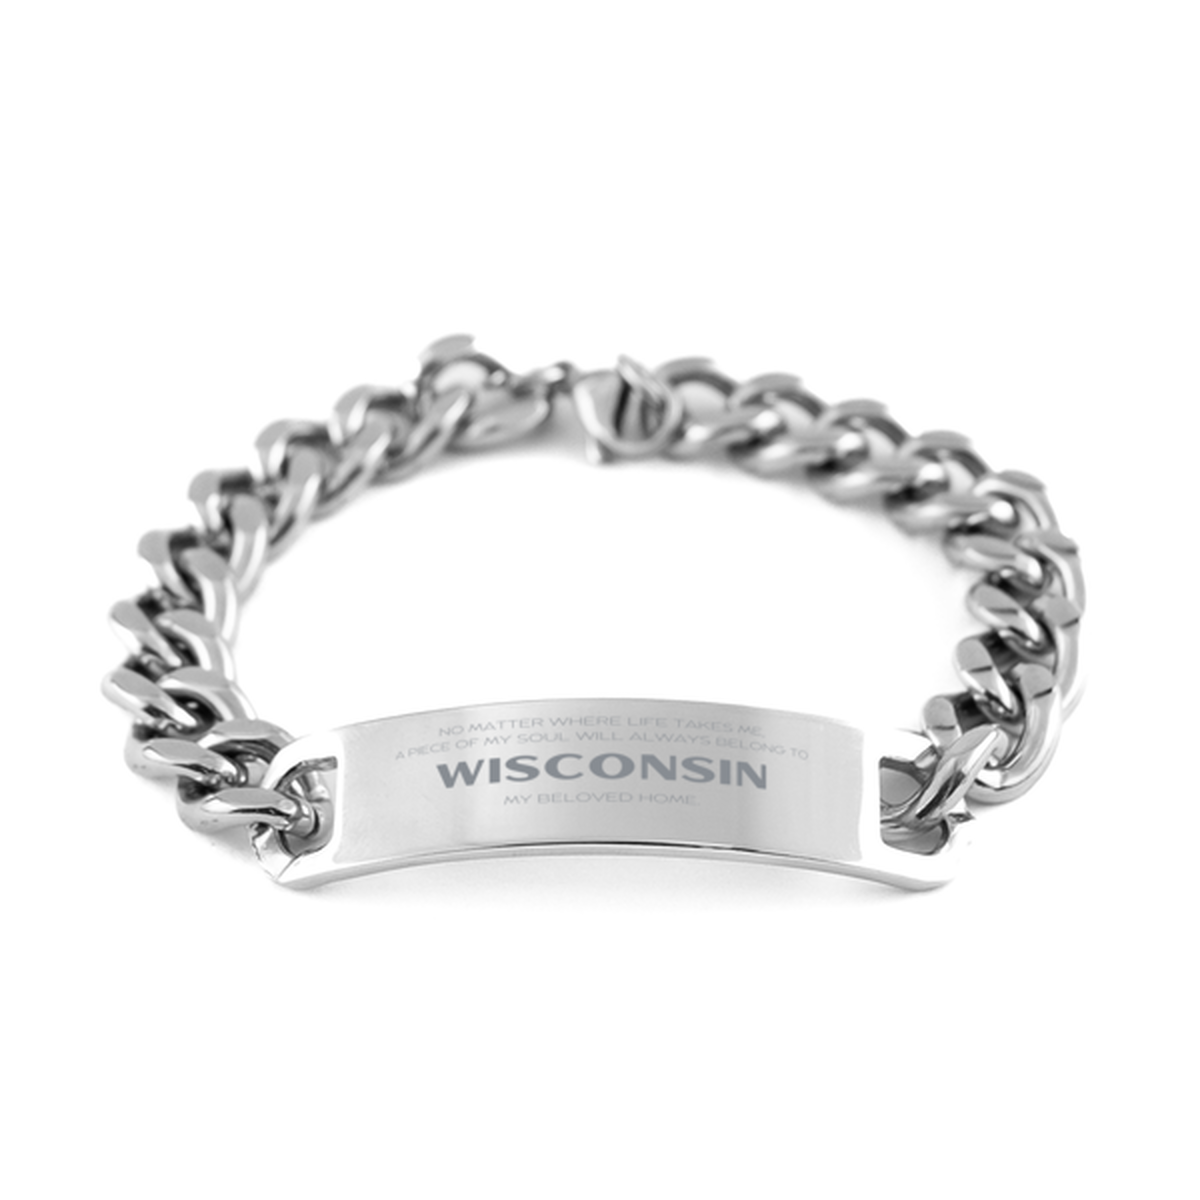 Love Wisconsin State Gifts, My soul will always belong to Wisconsin, Proud Cuban Chain Stainless Steel Bracelet, Birthday Unique Gifts For Wisconsin Men, Women, Friends